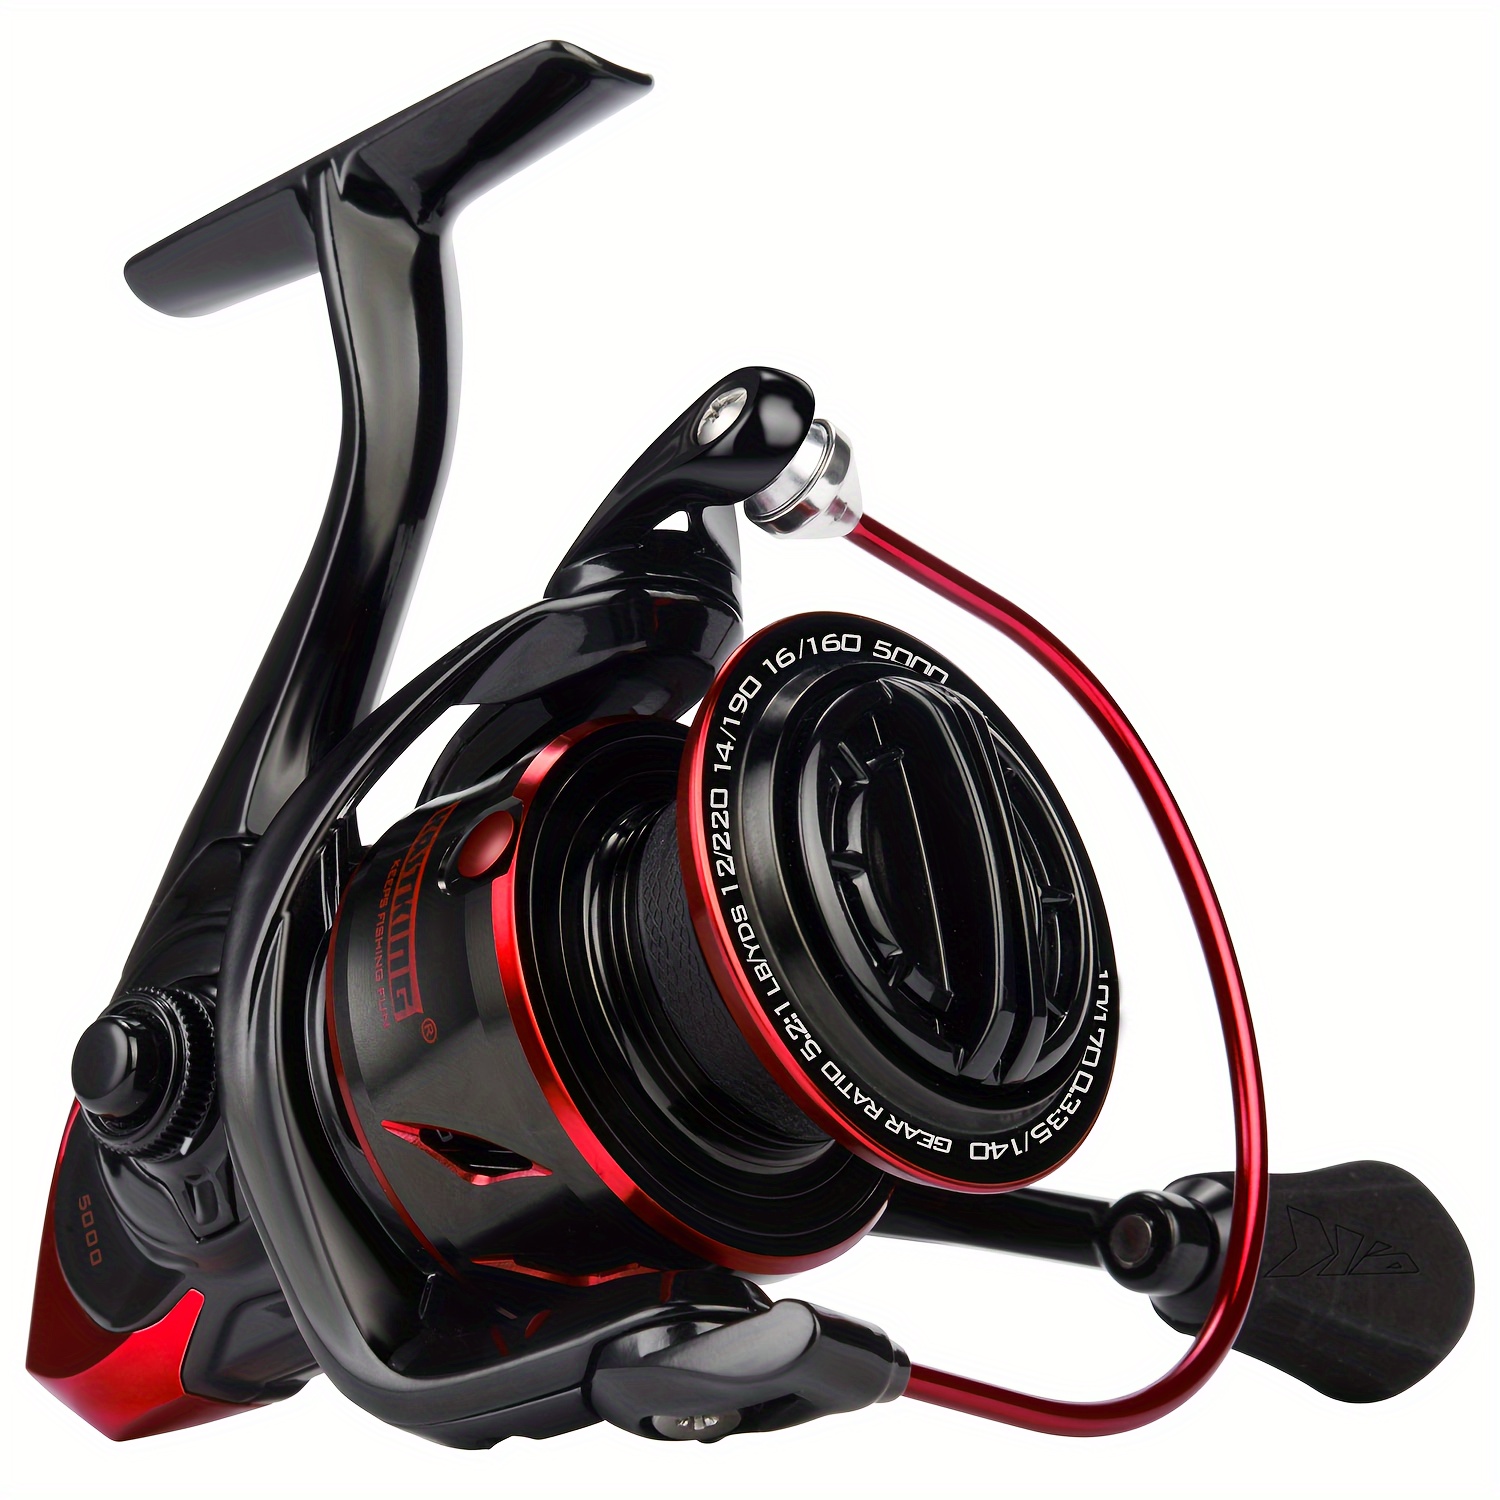 One Bass Fishing reels Light Weight Saltwater Spinning Reel - 39.5 LB Carbon